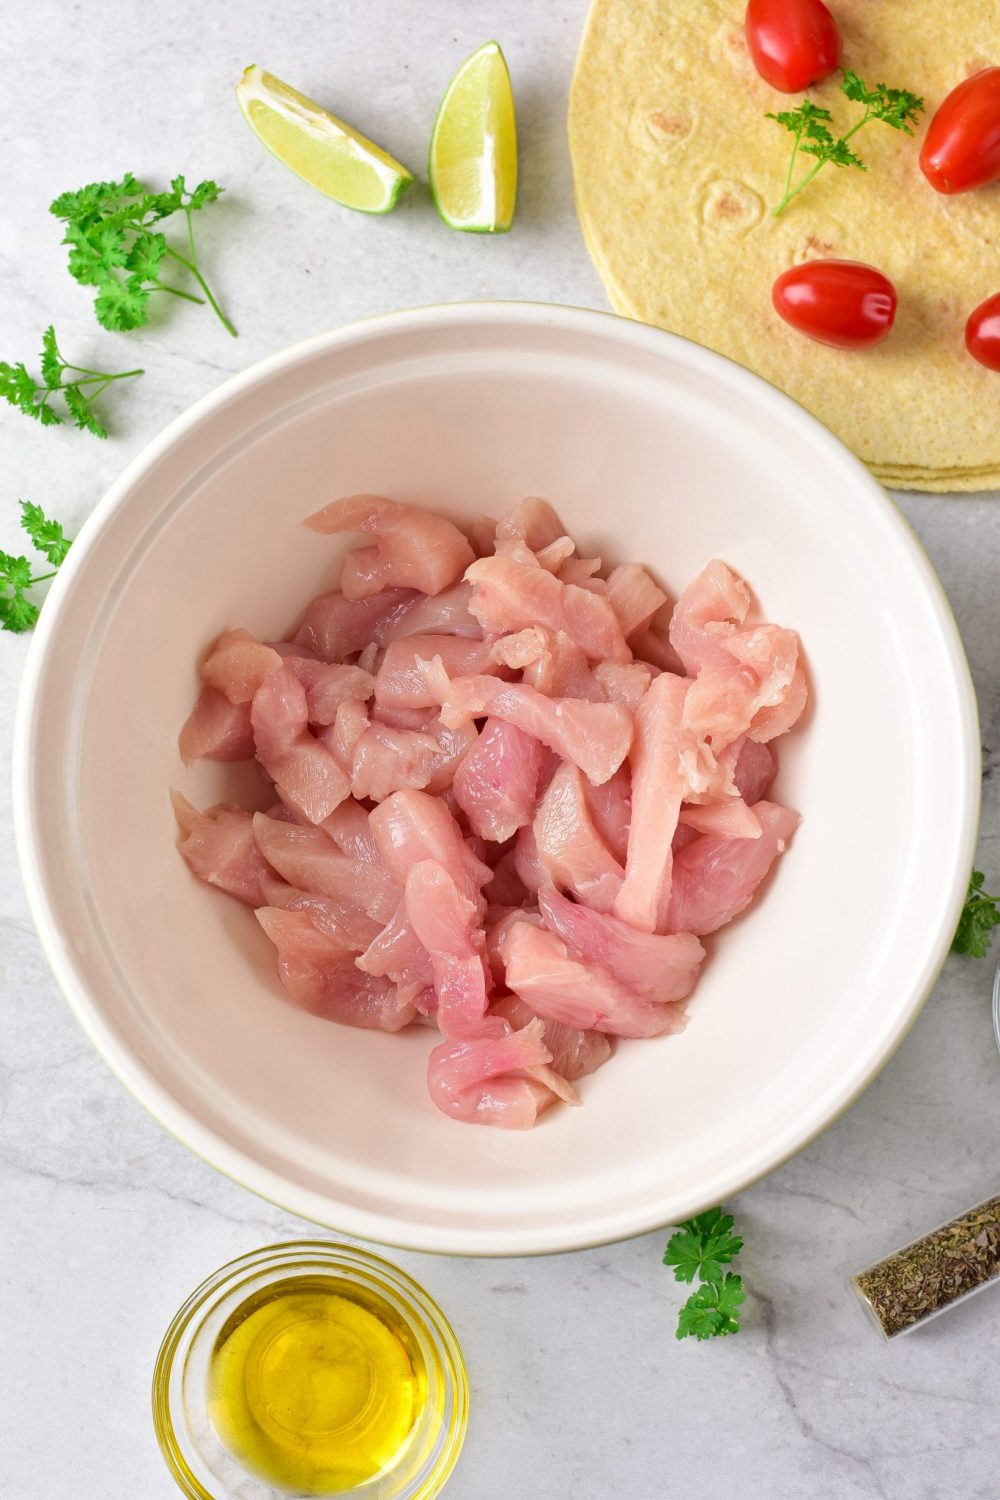 Strips of raw chicken in a mixing bowl